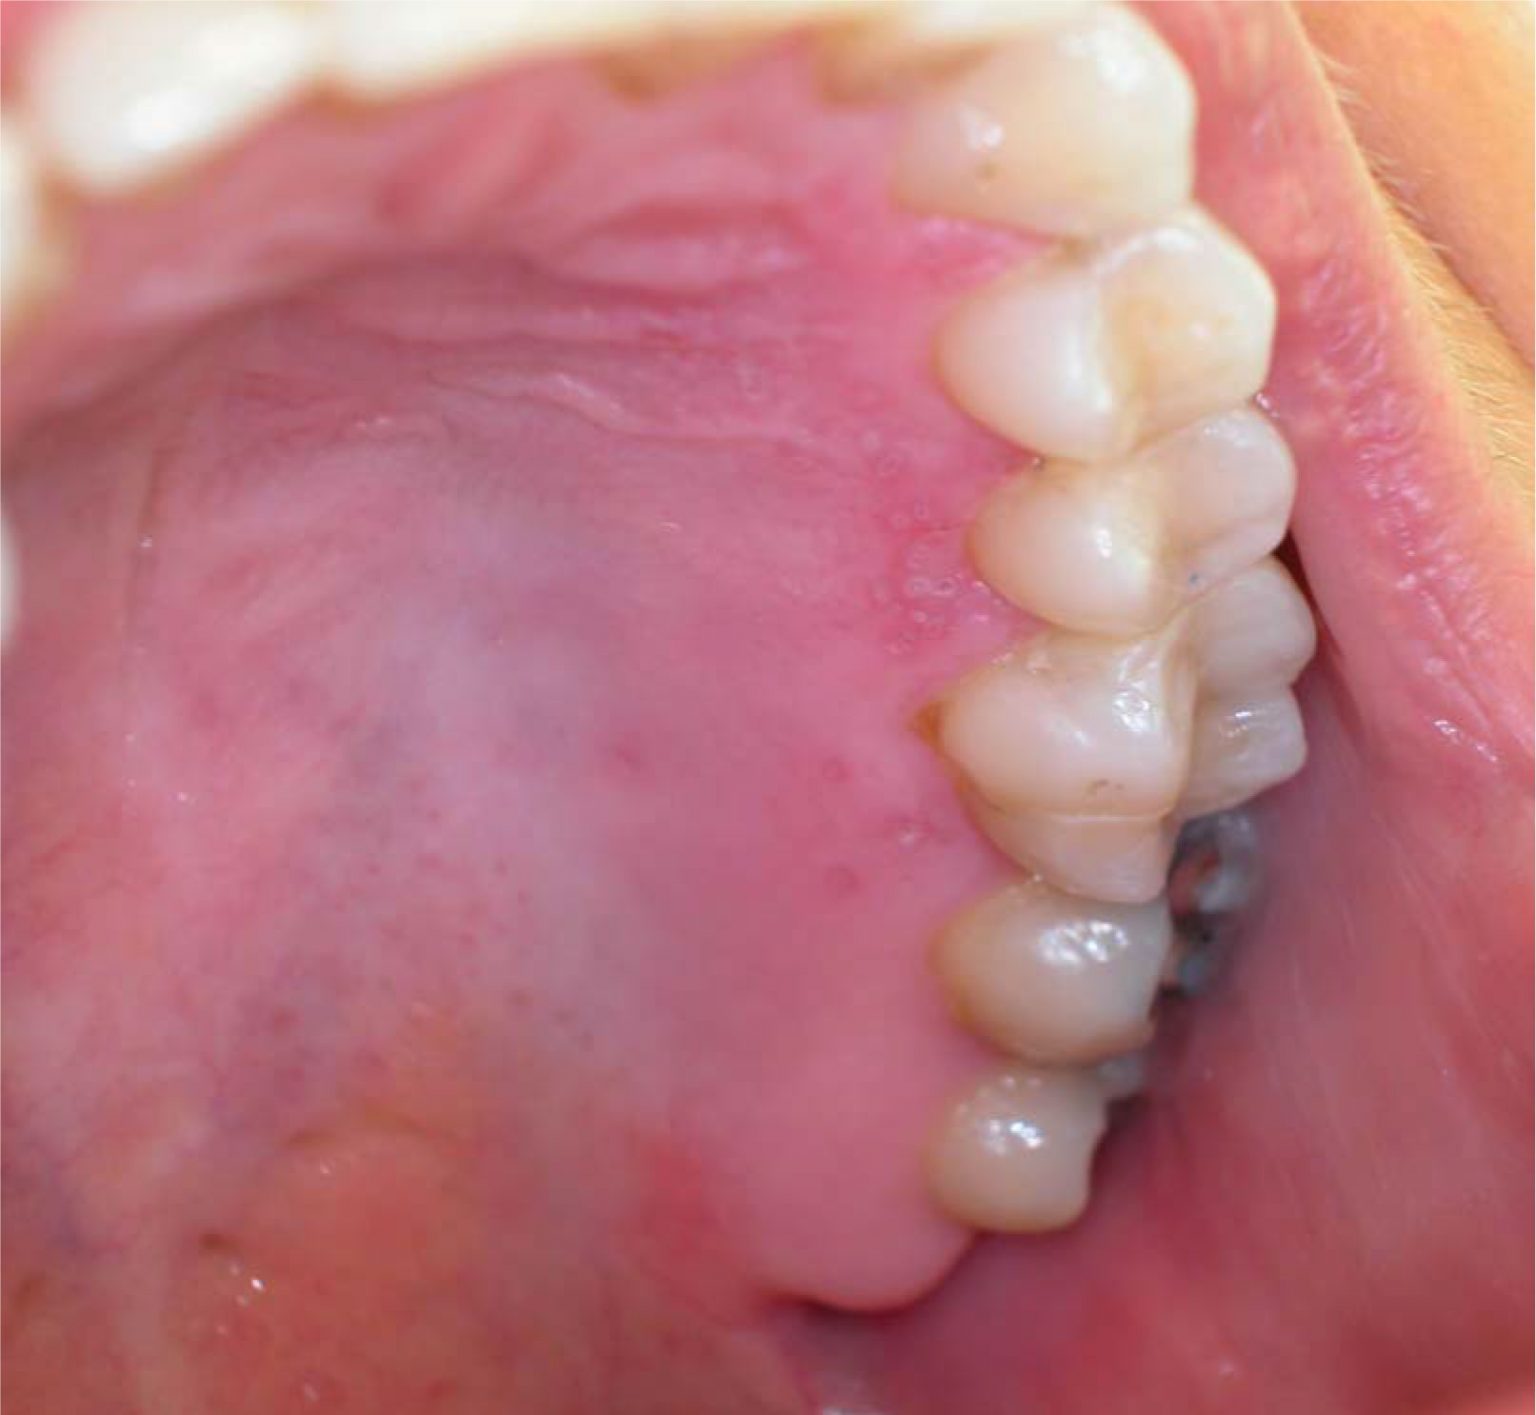 Herpes Simplex Virus (Hsv) Infection Of The Mouth European